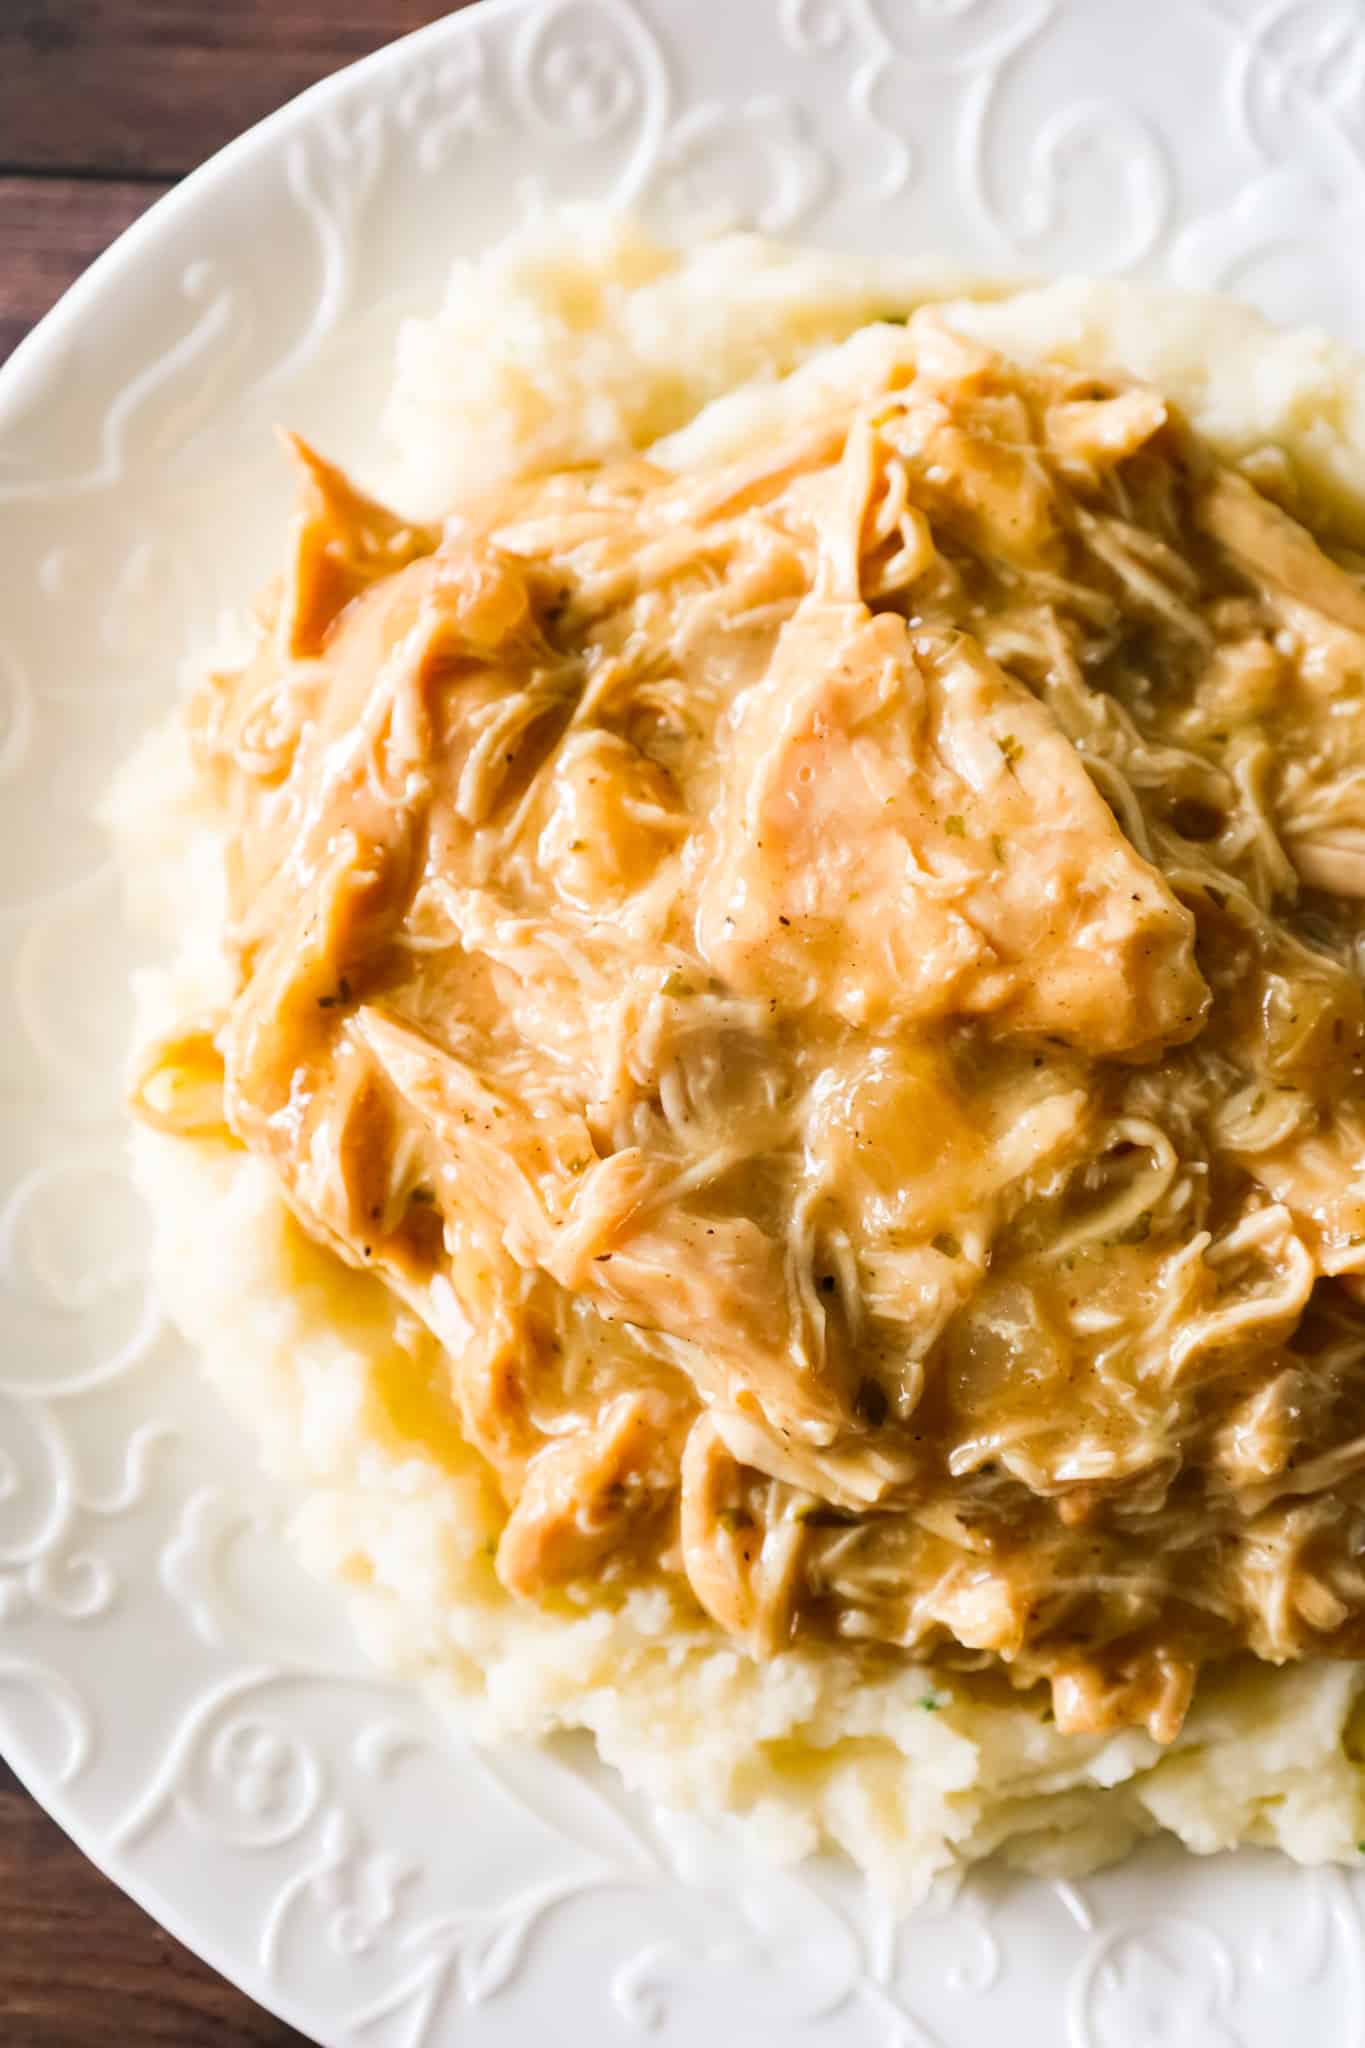 Crock Pot Chicken and Gravy is an easy slow cooker chicken recipe made with boneless, skinless chicken breasts, condensed cream of chicken soup and chicken gravy mix.